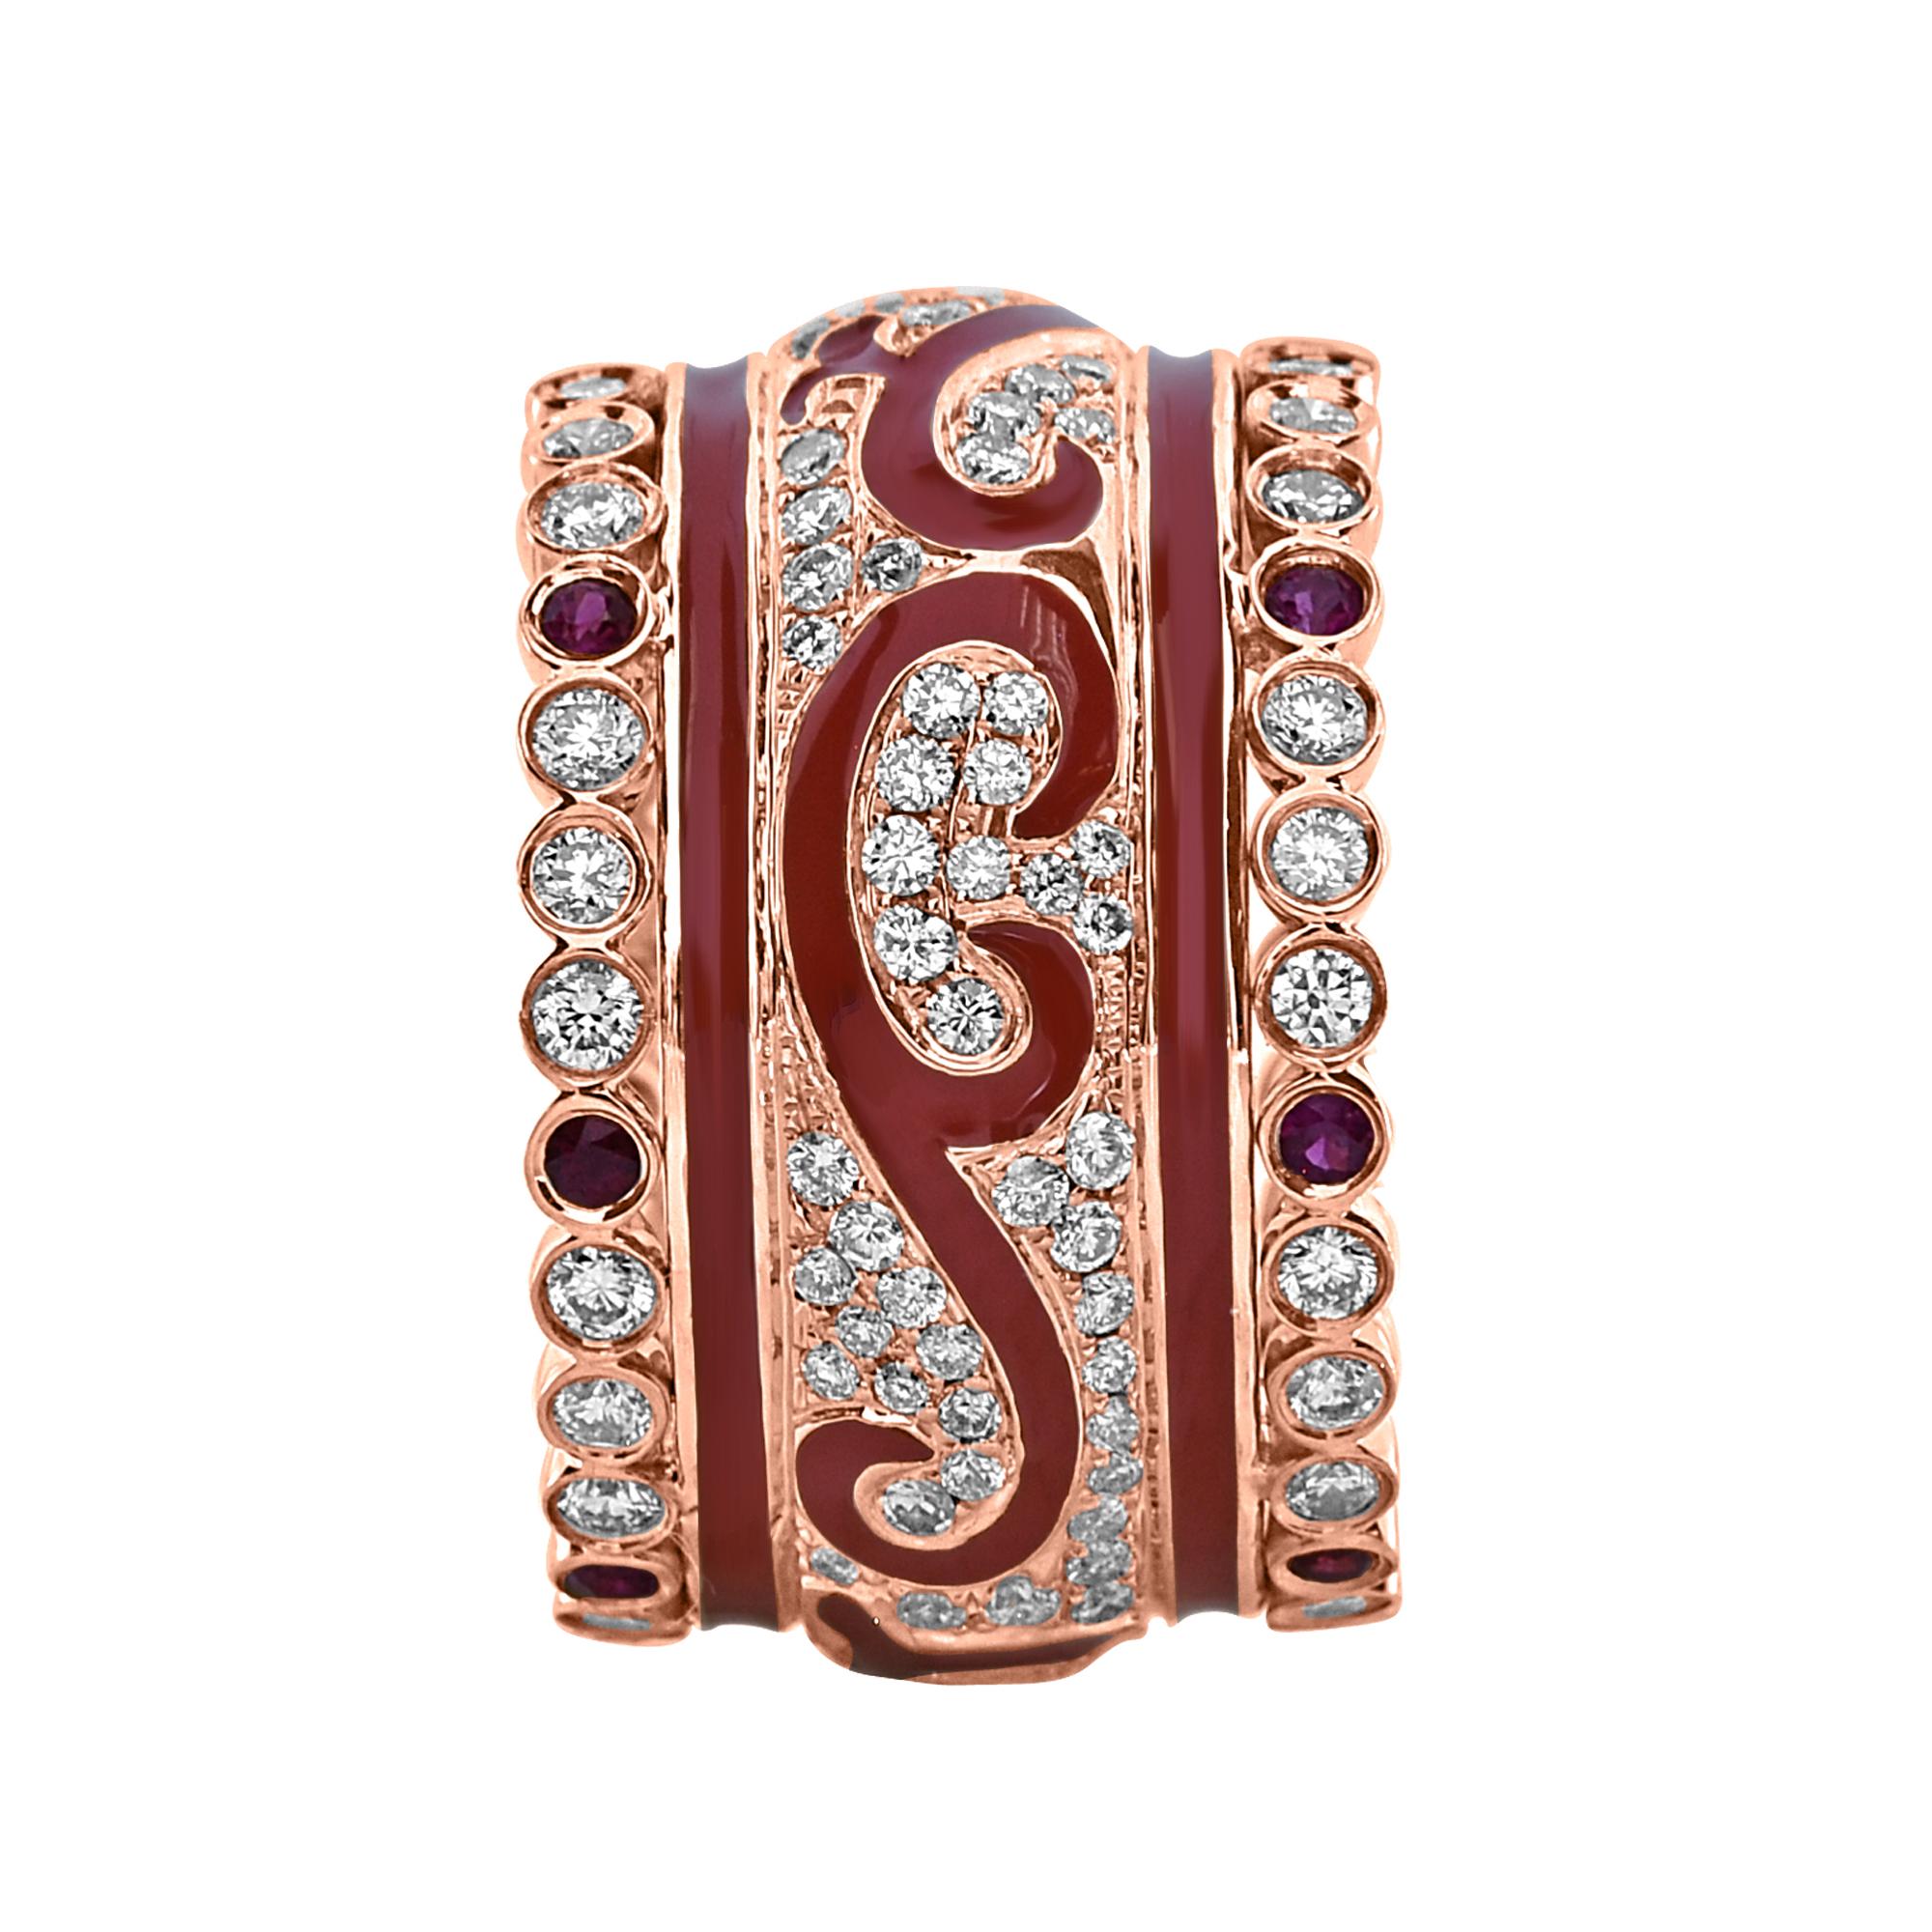 Very Unique and Stylish 18k Rose Gold Band with Red Oriental Style Enamel and Diamond Inlay & Border containing Natural Rubies 
Total Carat Weight: 1.32 Carats 
White Diamonds: 1.32 Carats
Rubies: 0.28 Carats
Setting: 11.27 grams, 18k Rose Gold